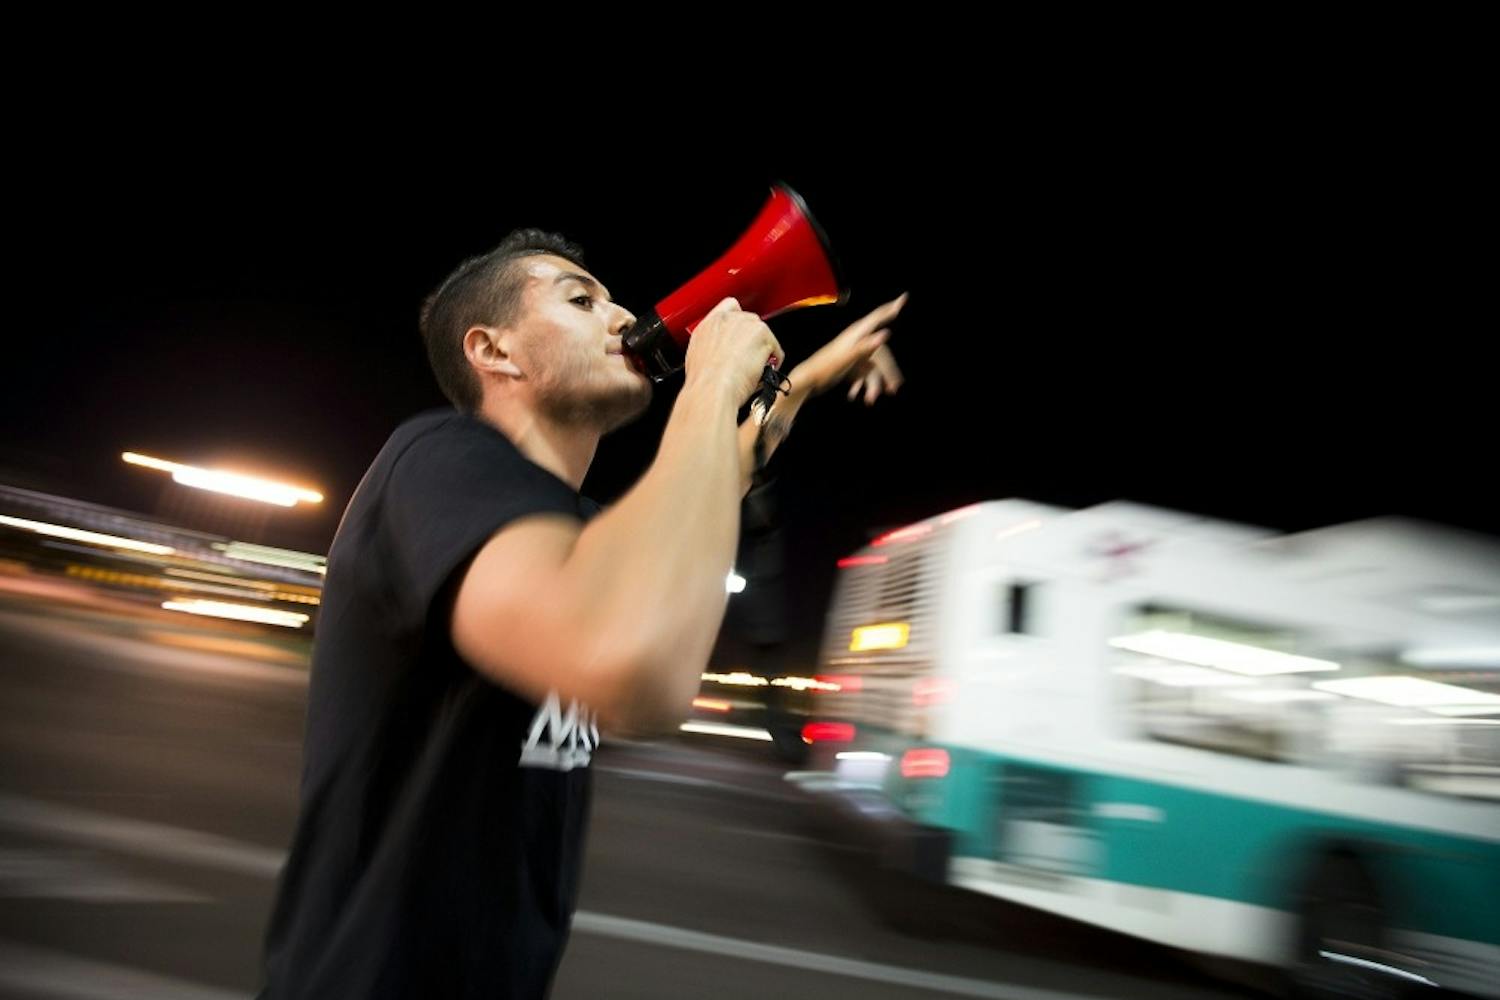 Organizer Randy Perez starts a chant during an election results protest on the ASU Tempe campus on Saturday, Nov. 12, 2016.